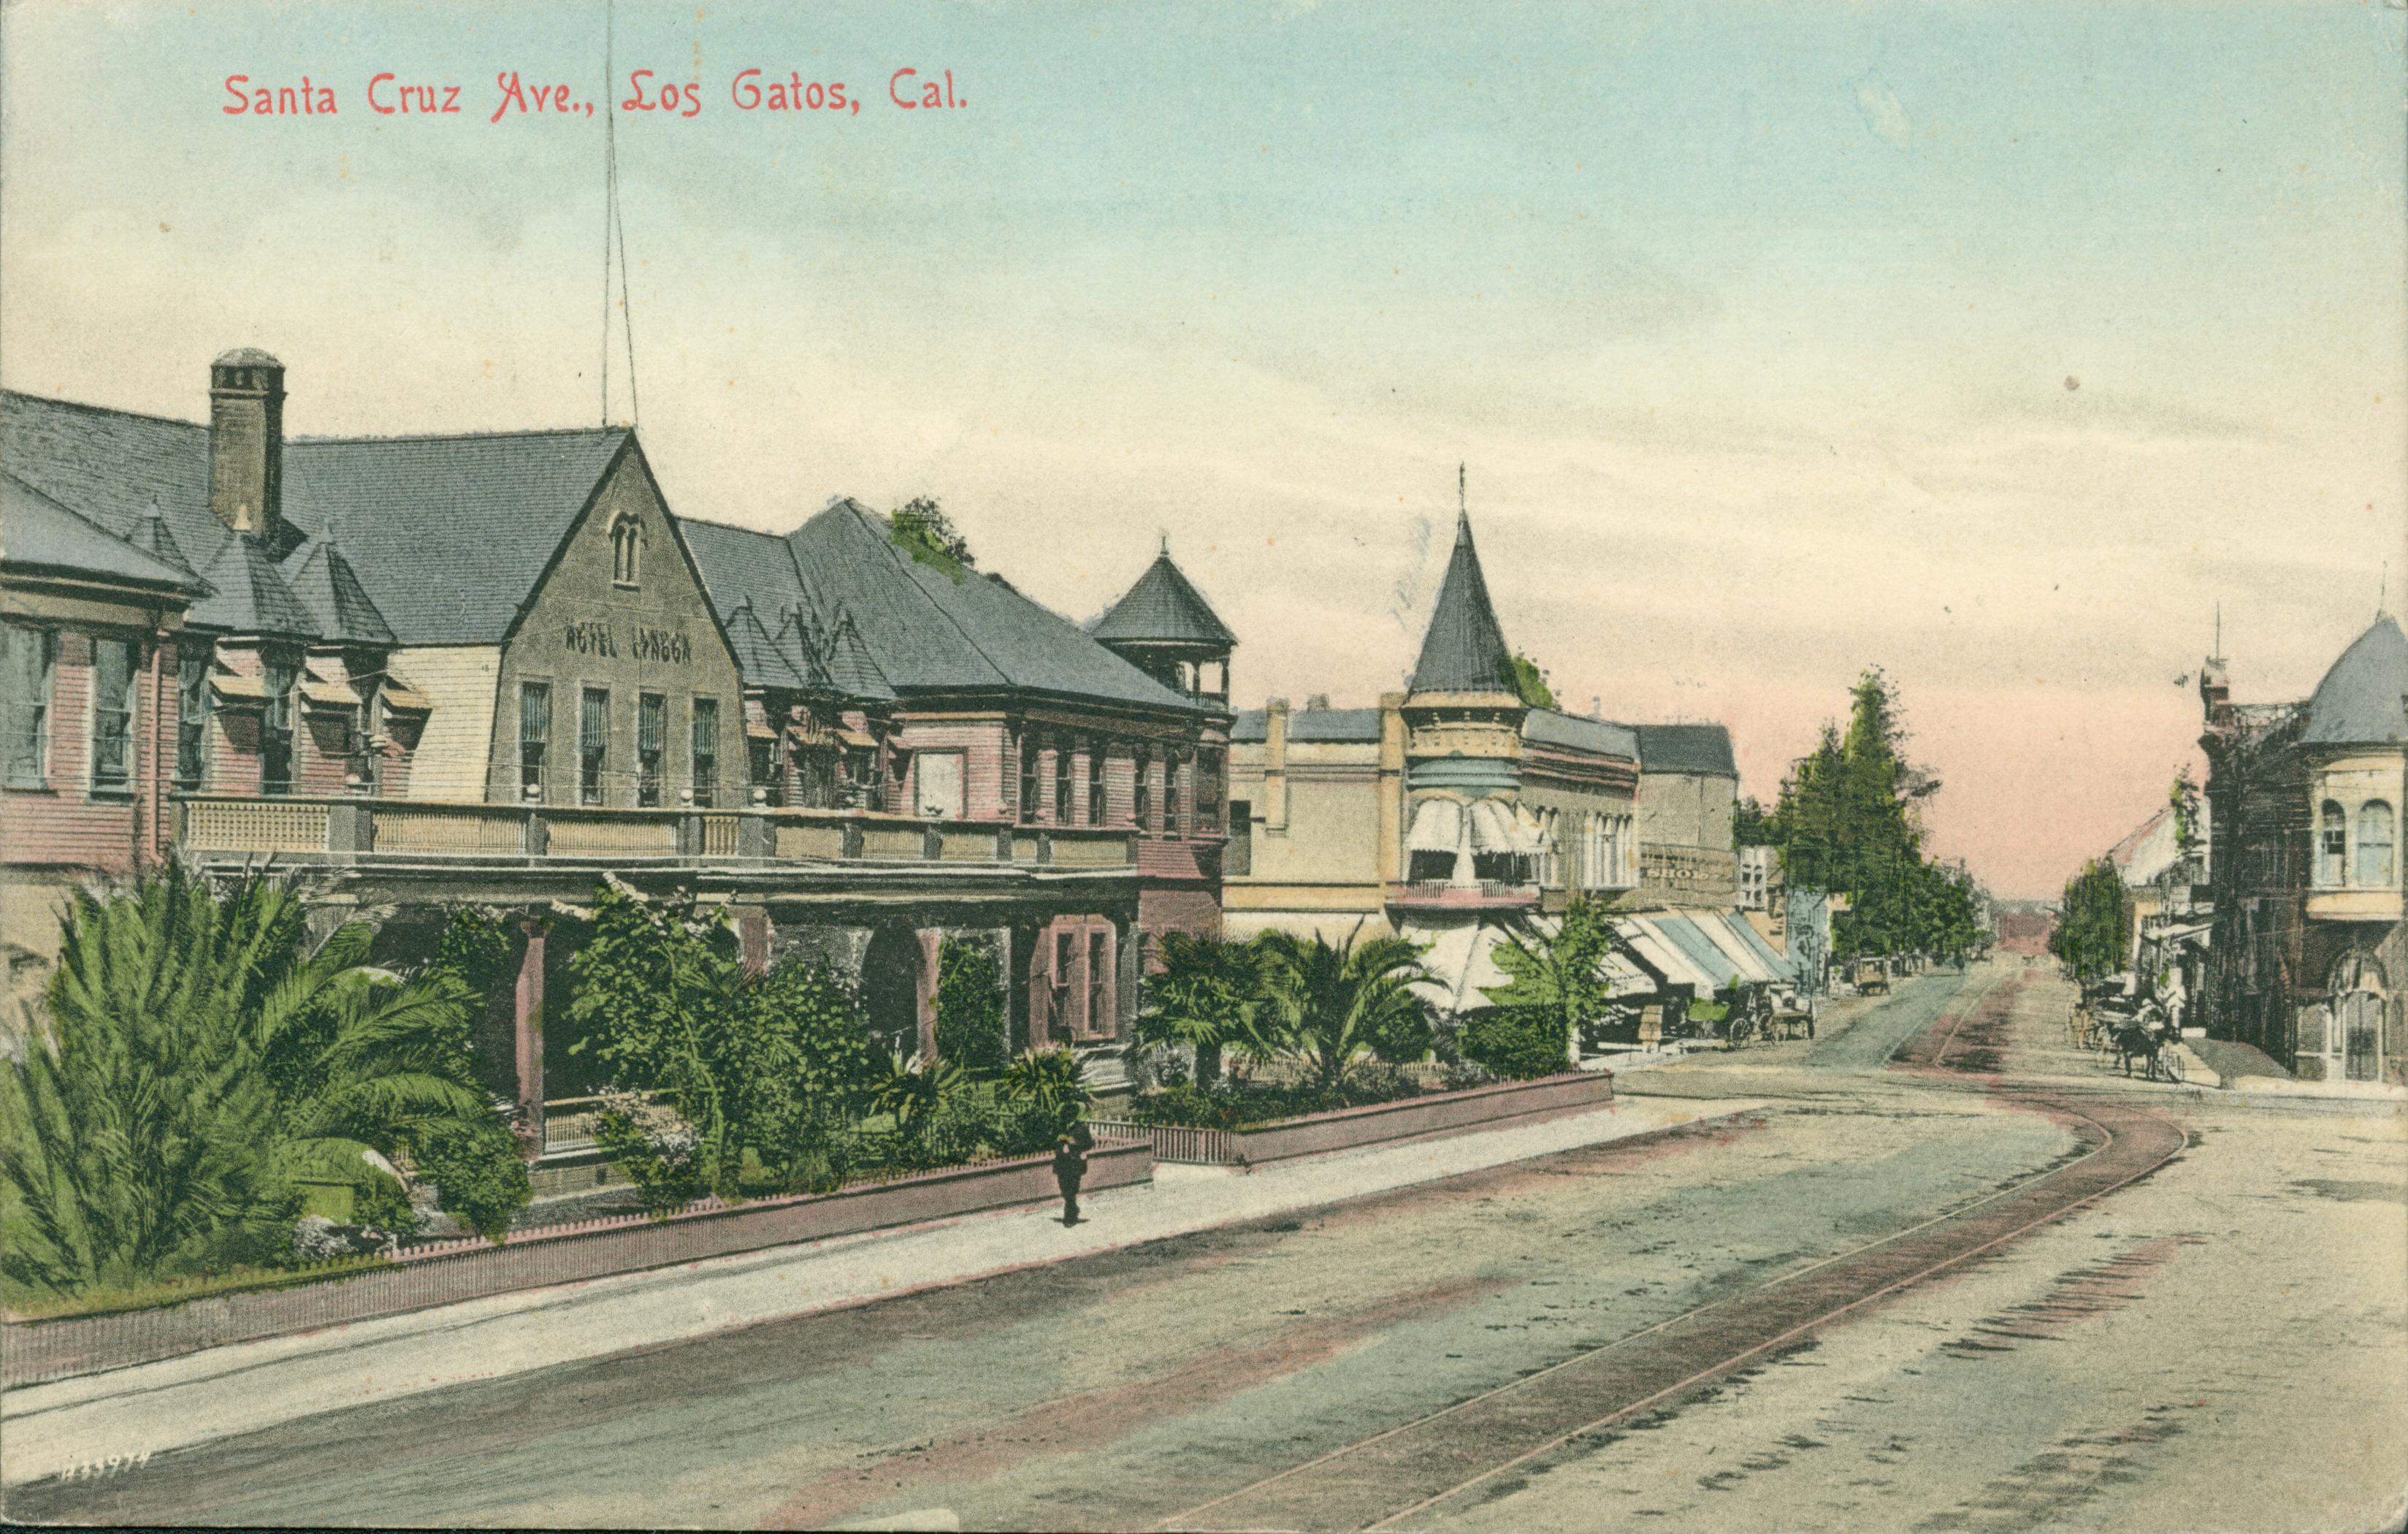 Large, grand homes bordering a wide road with a trolley track laid down in the center of the road. Trees and shrubs in the front yard of the homes, more buildings in the background